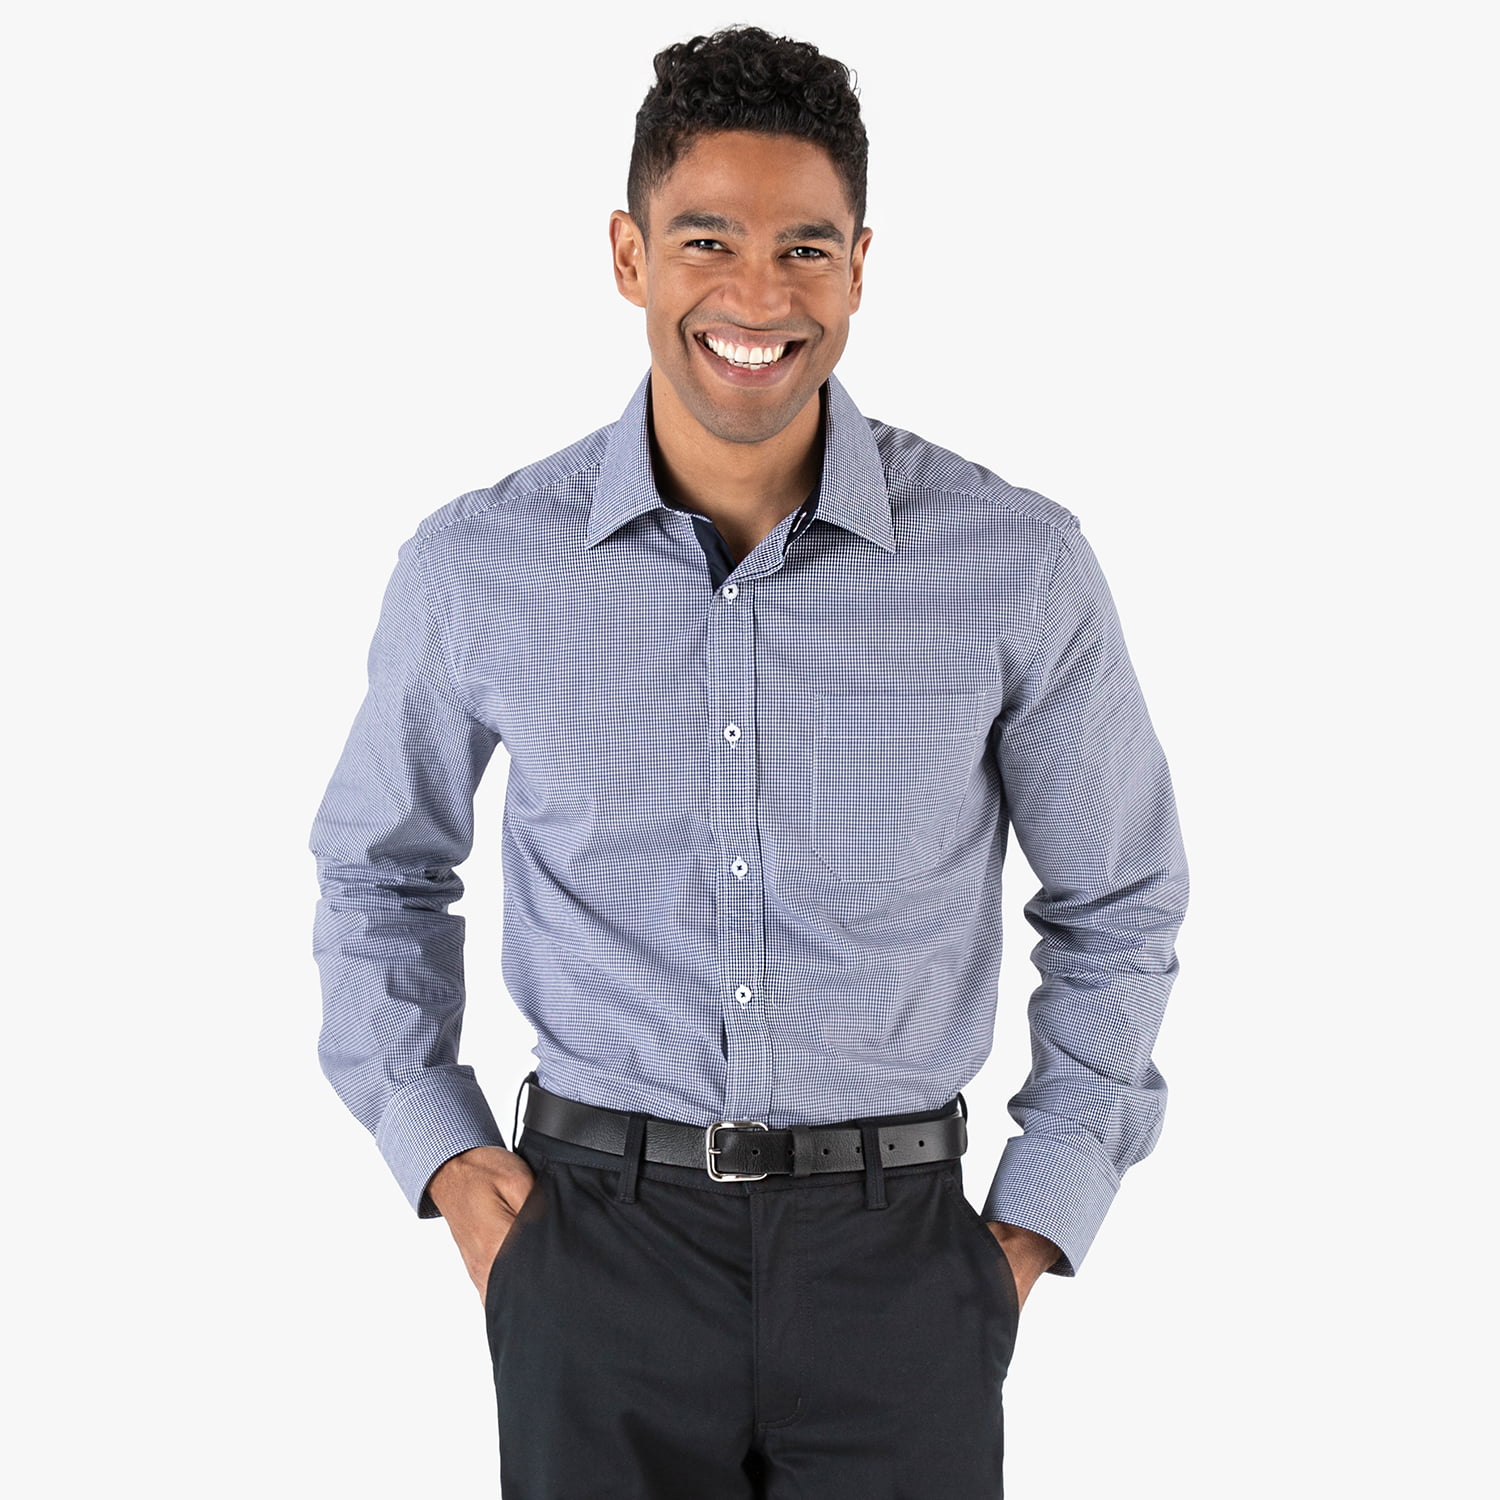 Shop Men's Business and Work Shirts Online